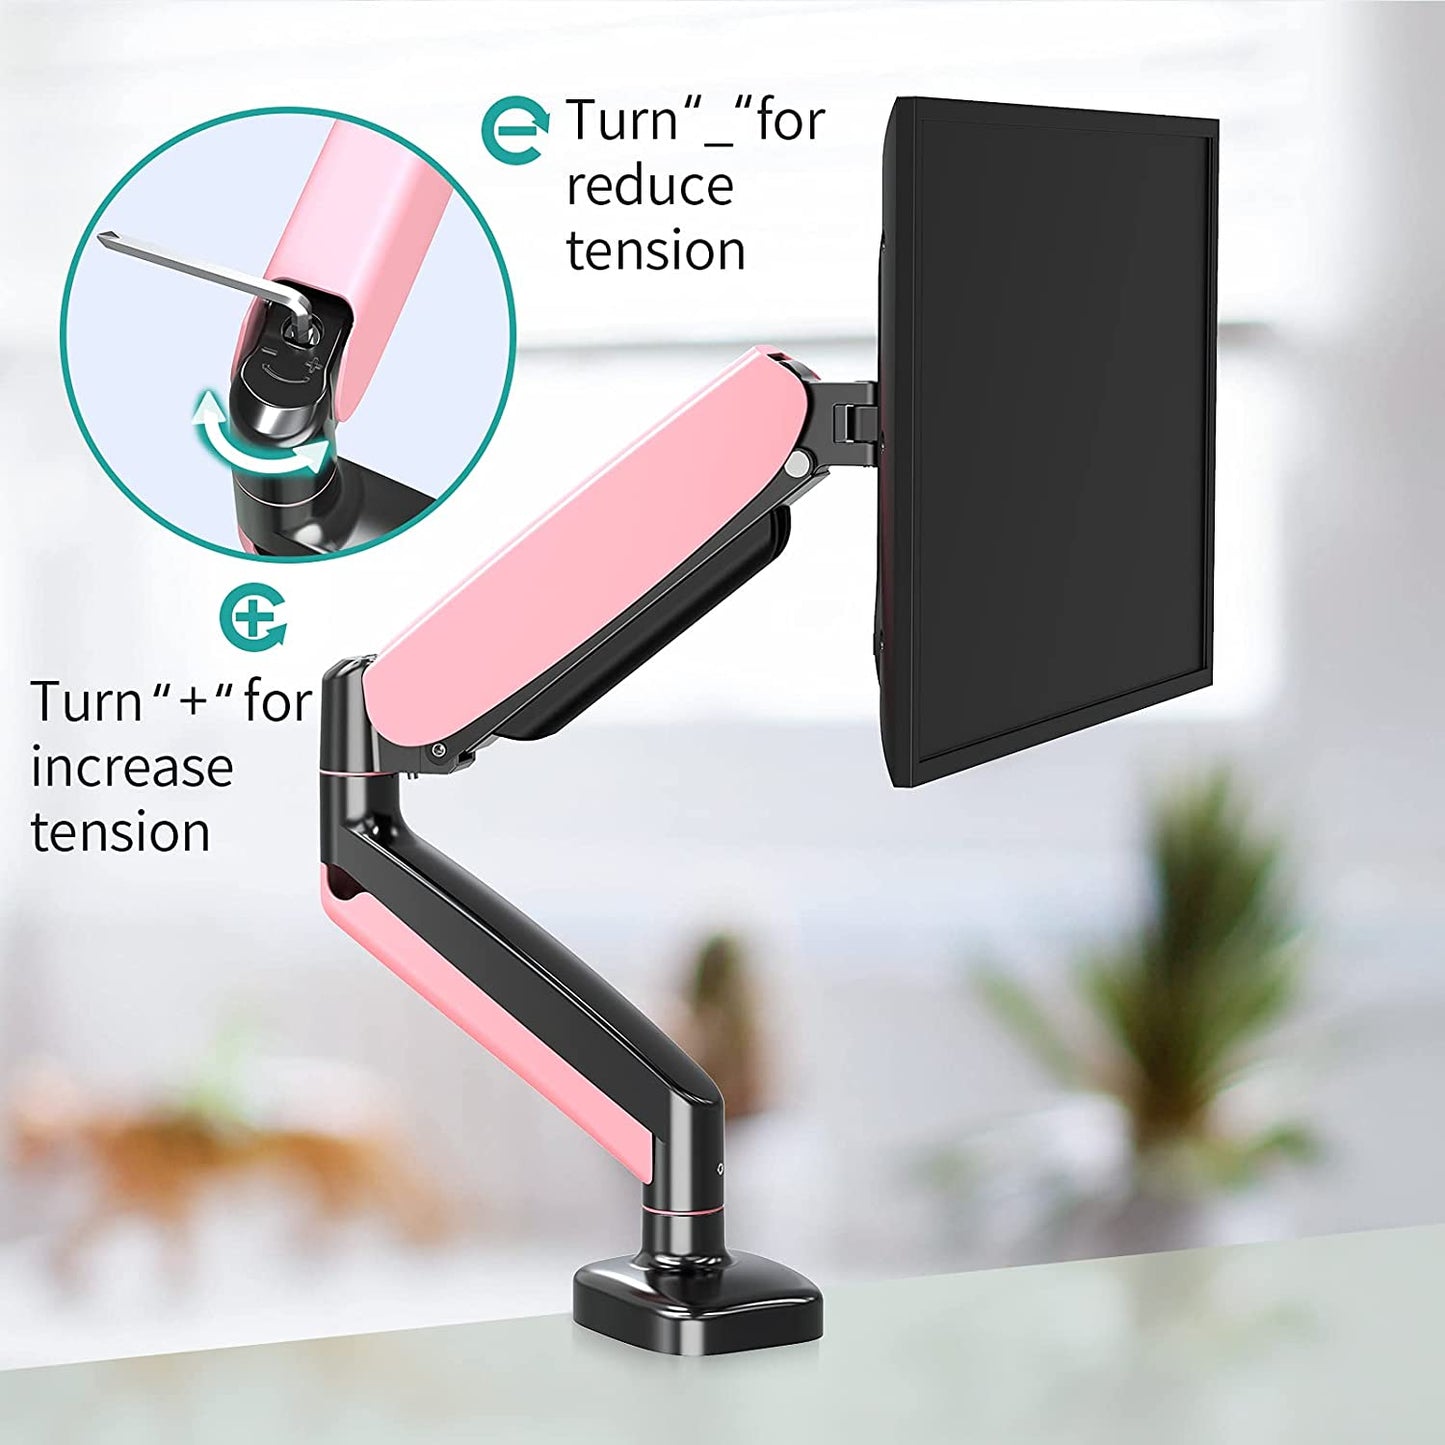 Single Arm pink monitor desk mount with tension adjustment